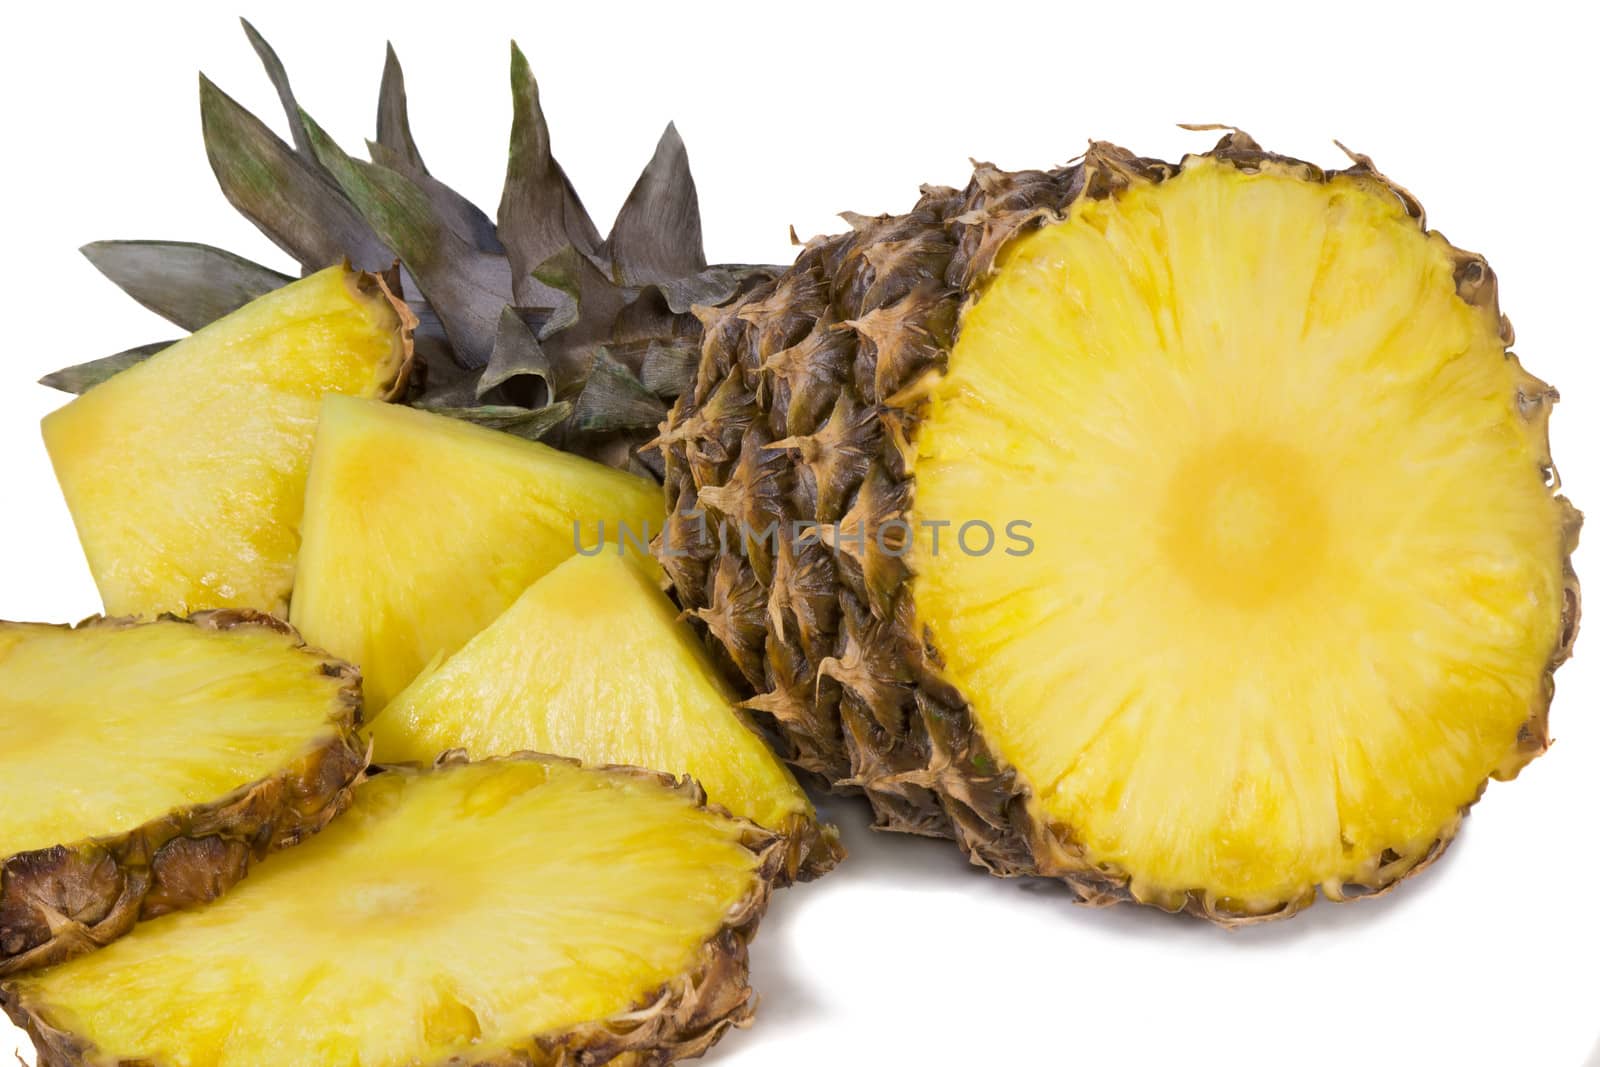 Sliced pineapple and slices of pineapple. Photographed on a white background.